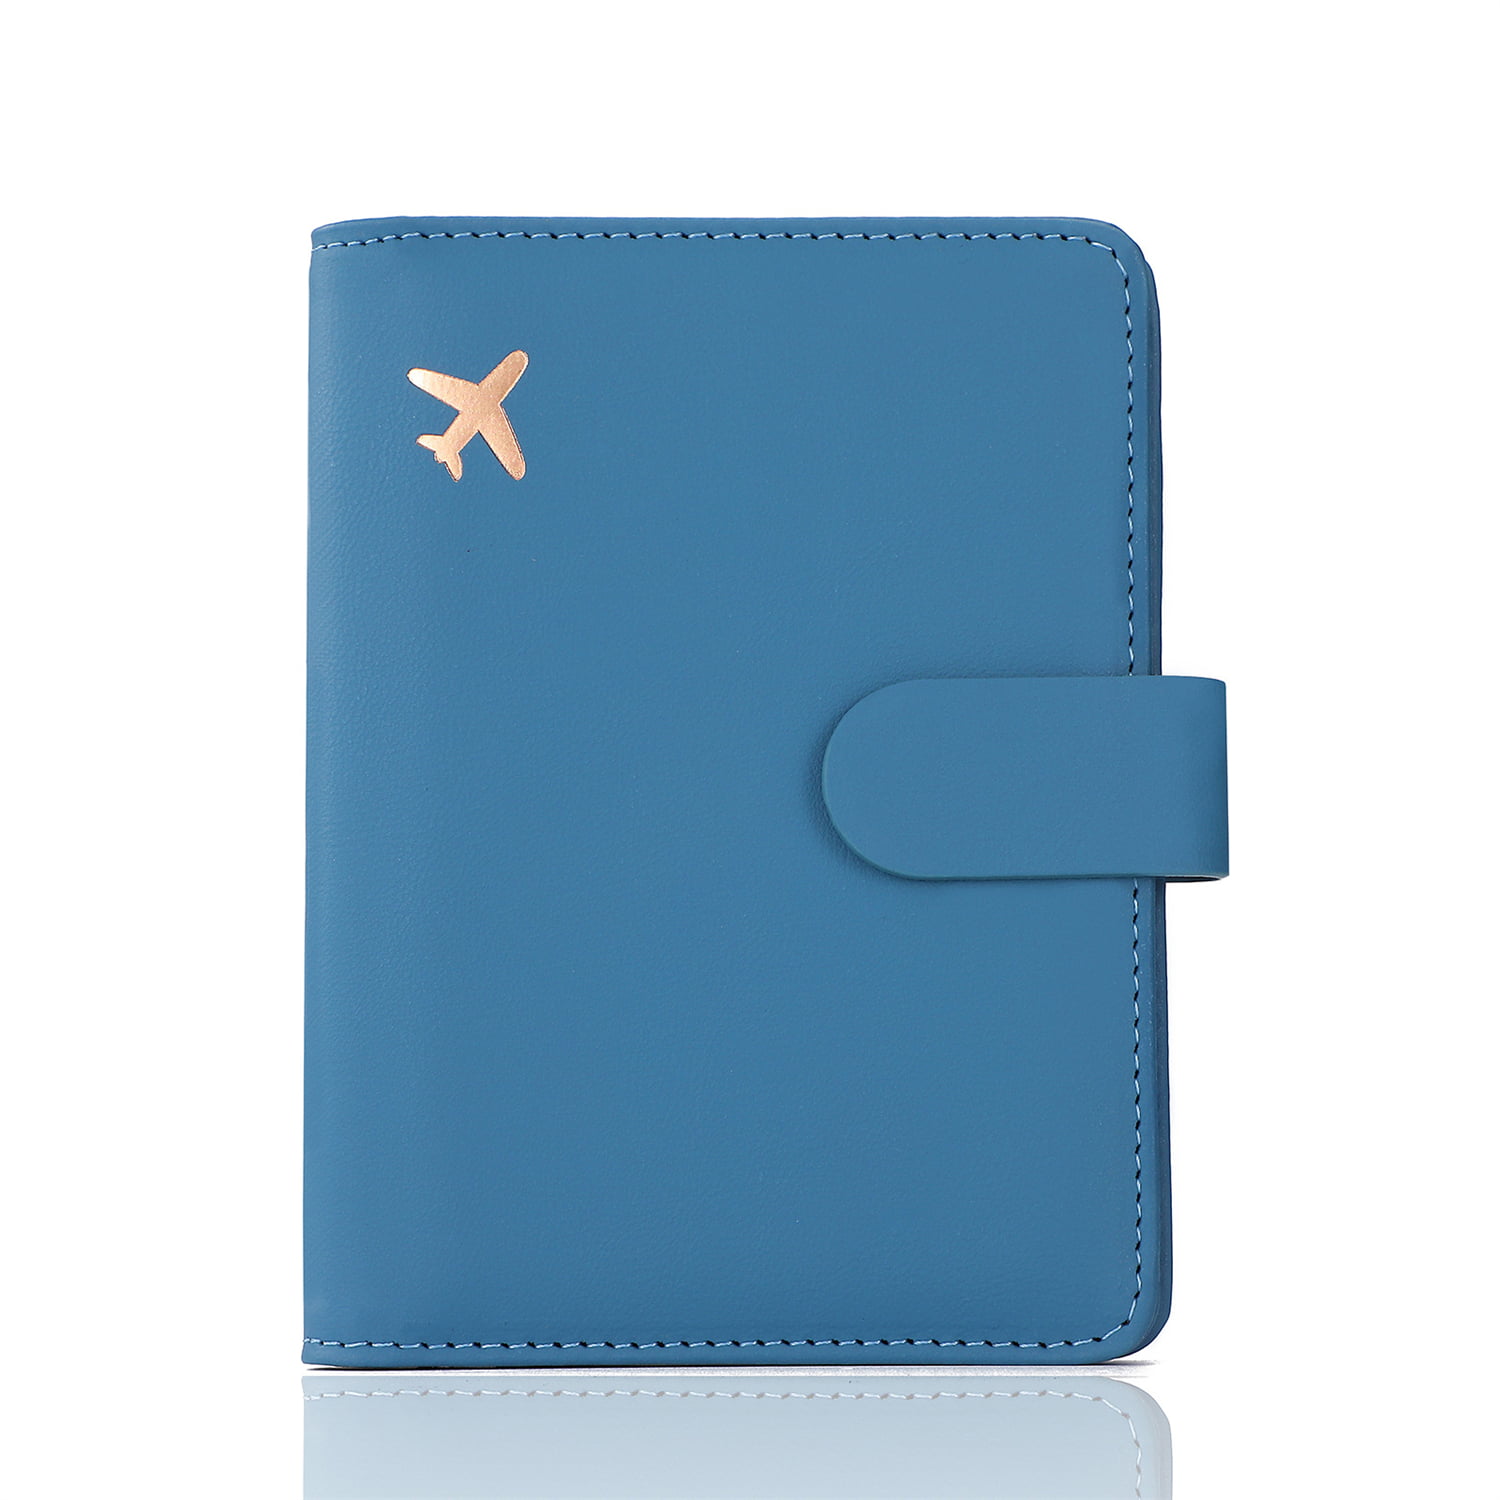 Yuanbang Lovers Couple Passport Cover Simple Airplane Men Women Travel Card Document Hot Stamping Wallet, Size: 1 Pack, Blue